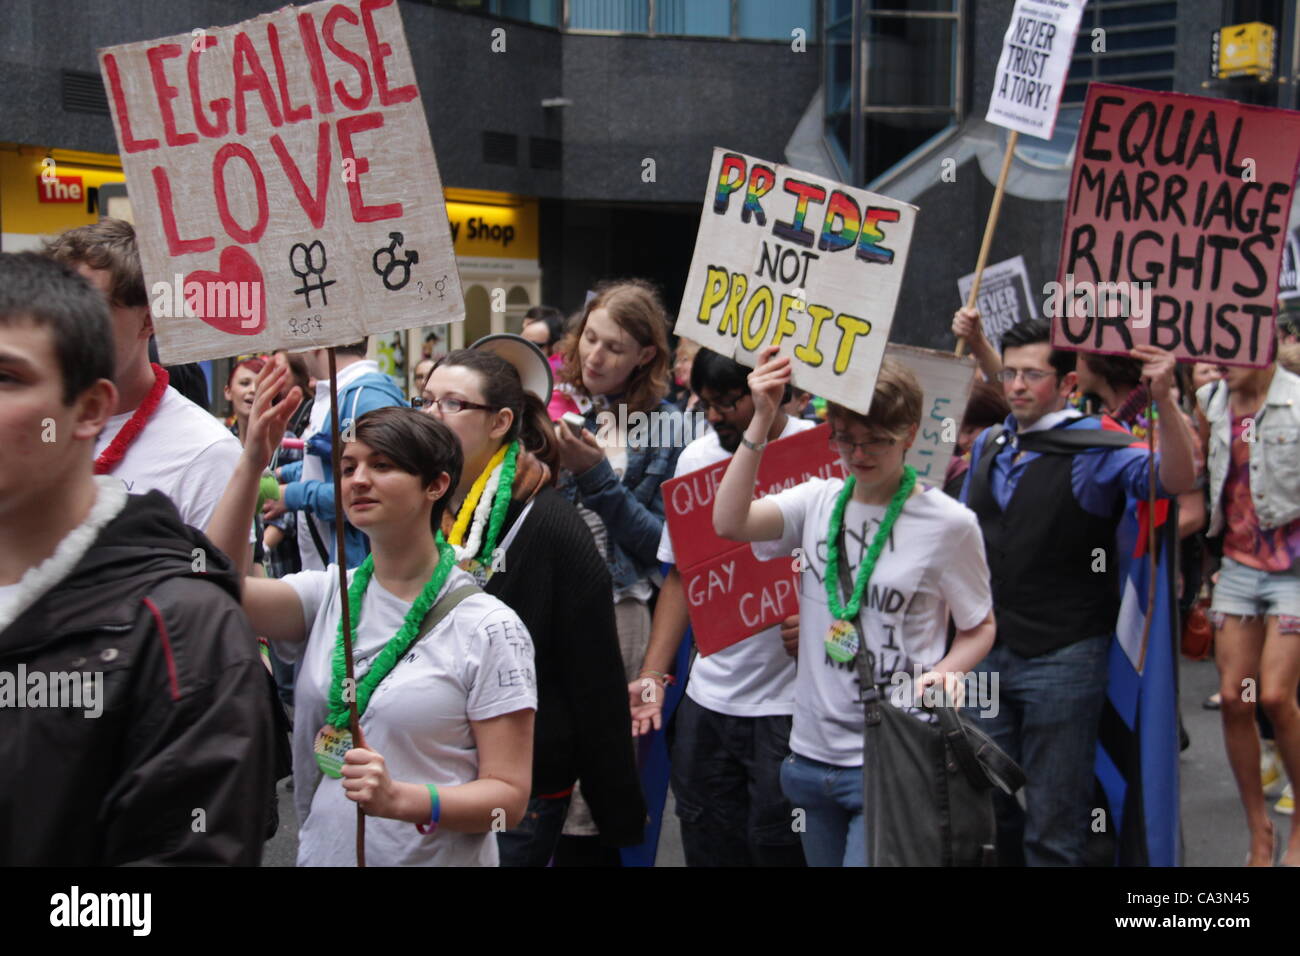 People Protesting And Carrying Signs Pride Not Profit Equal Marriage